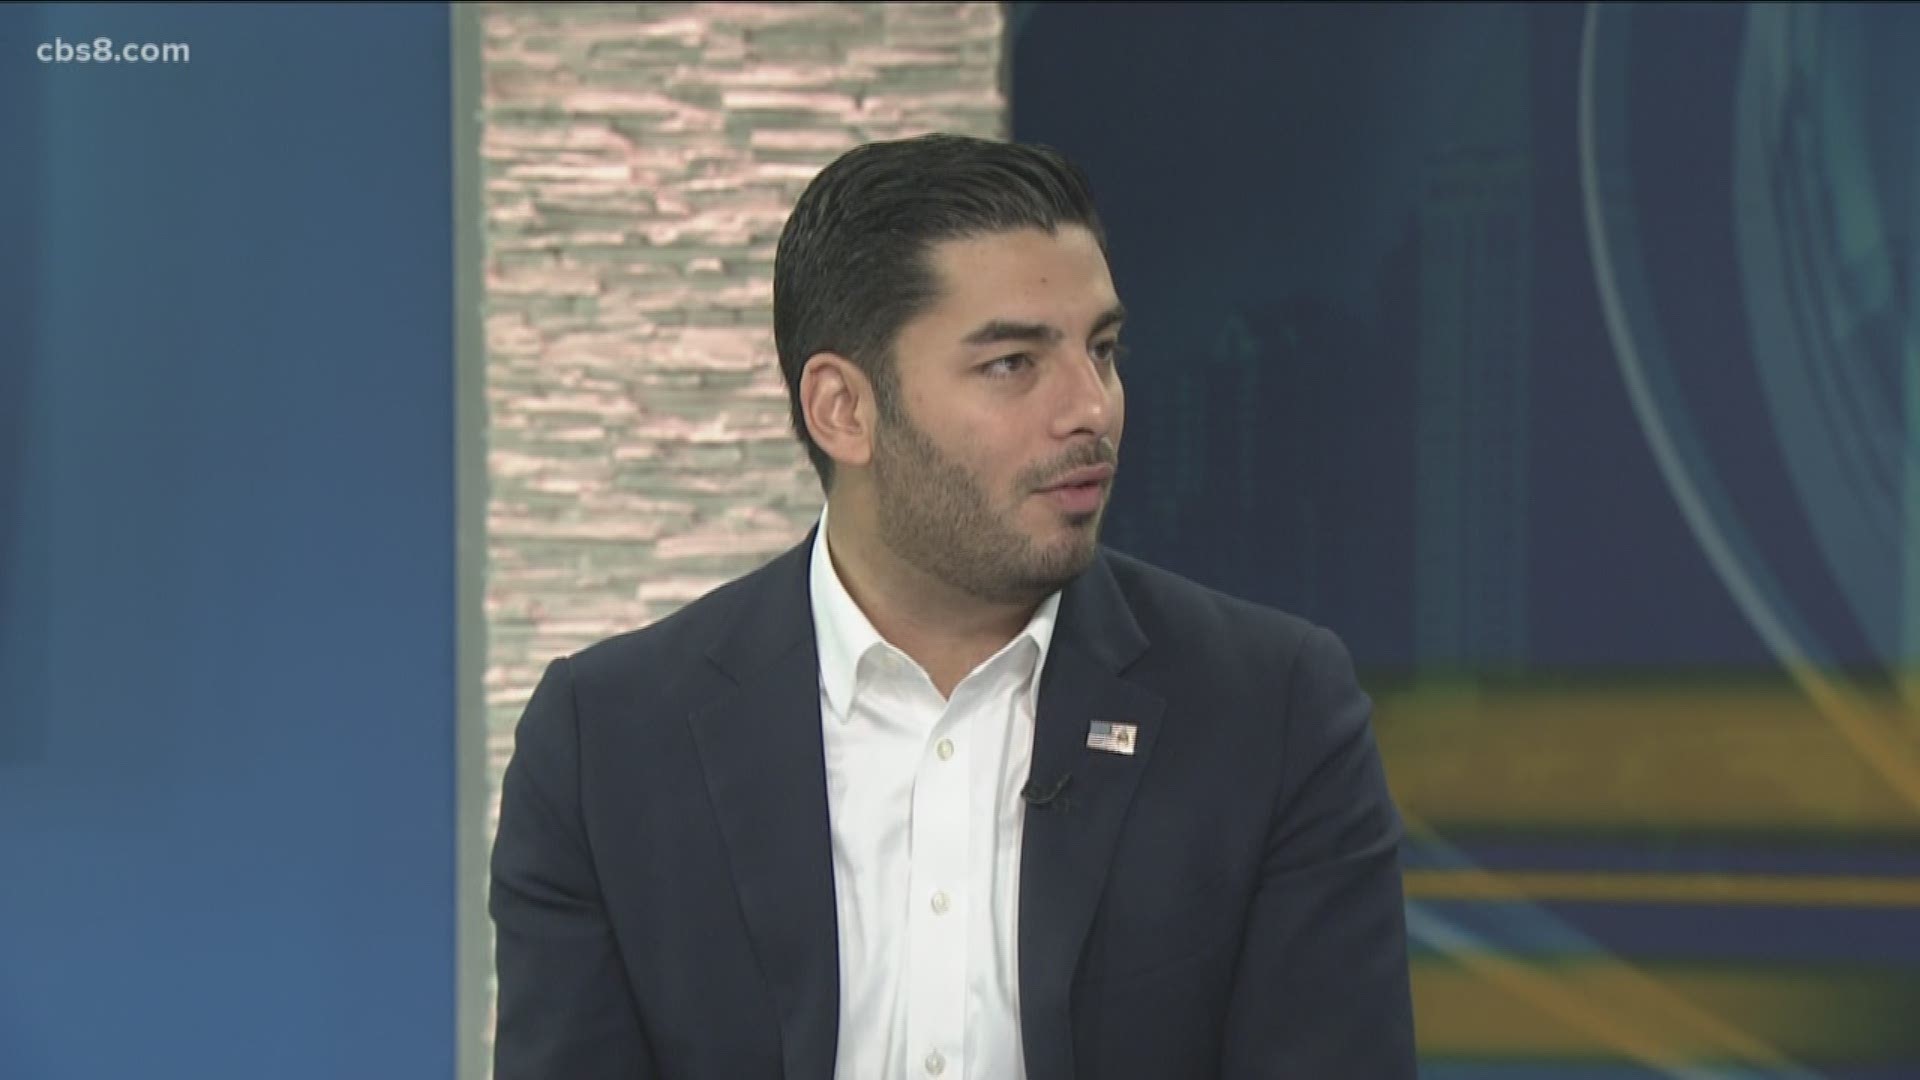 Campa-Najjar joined Morning Extra to talk about the November election and what sets him apart from Darrell Issa.